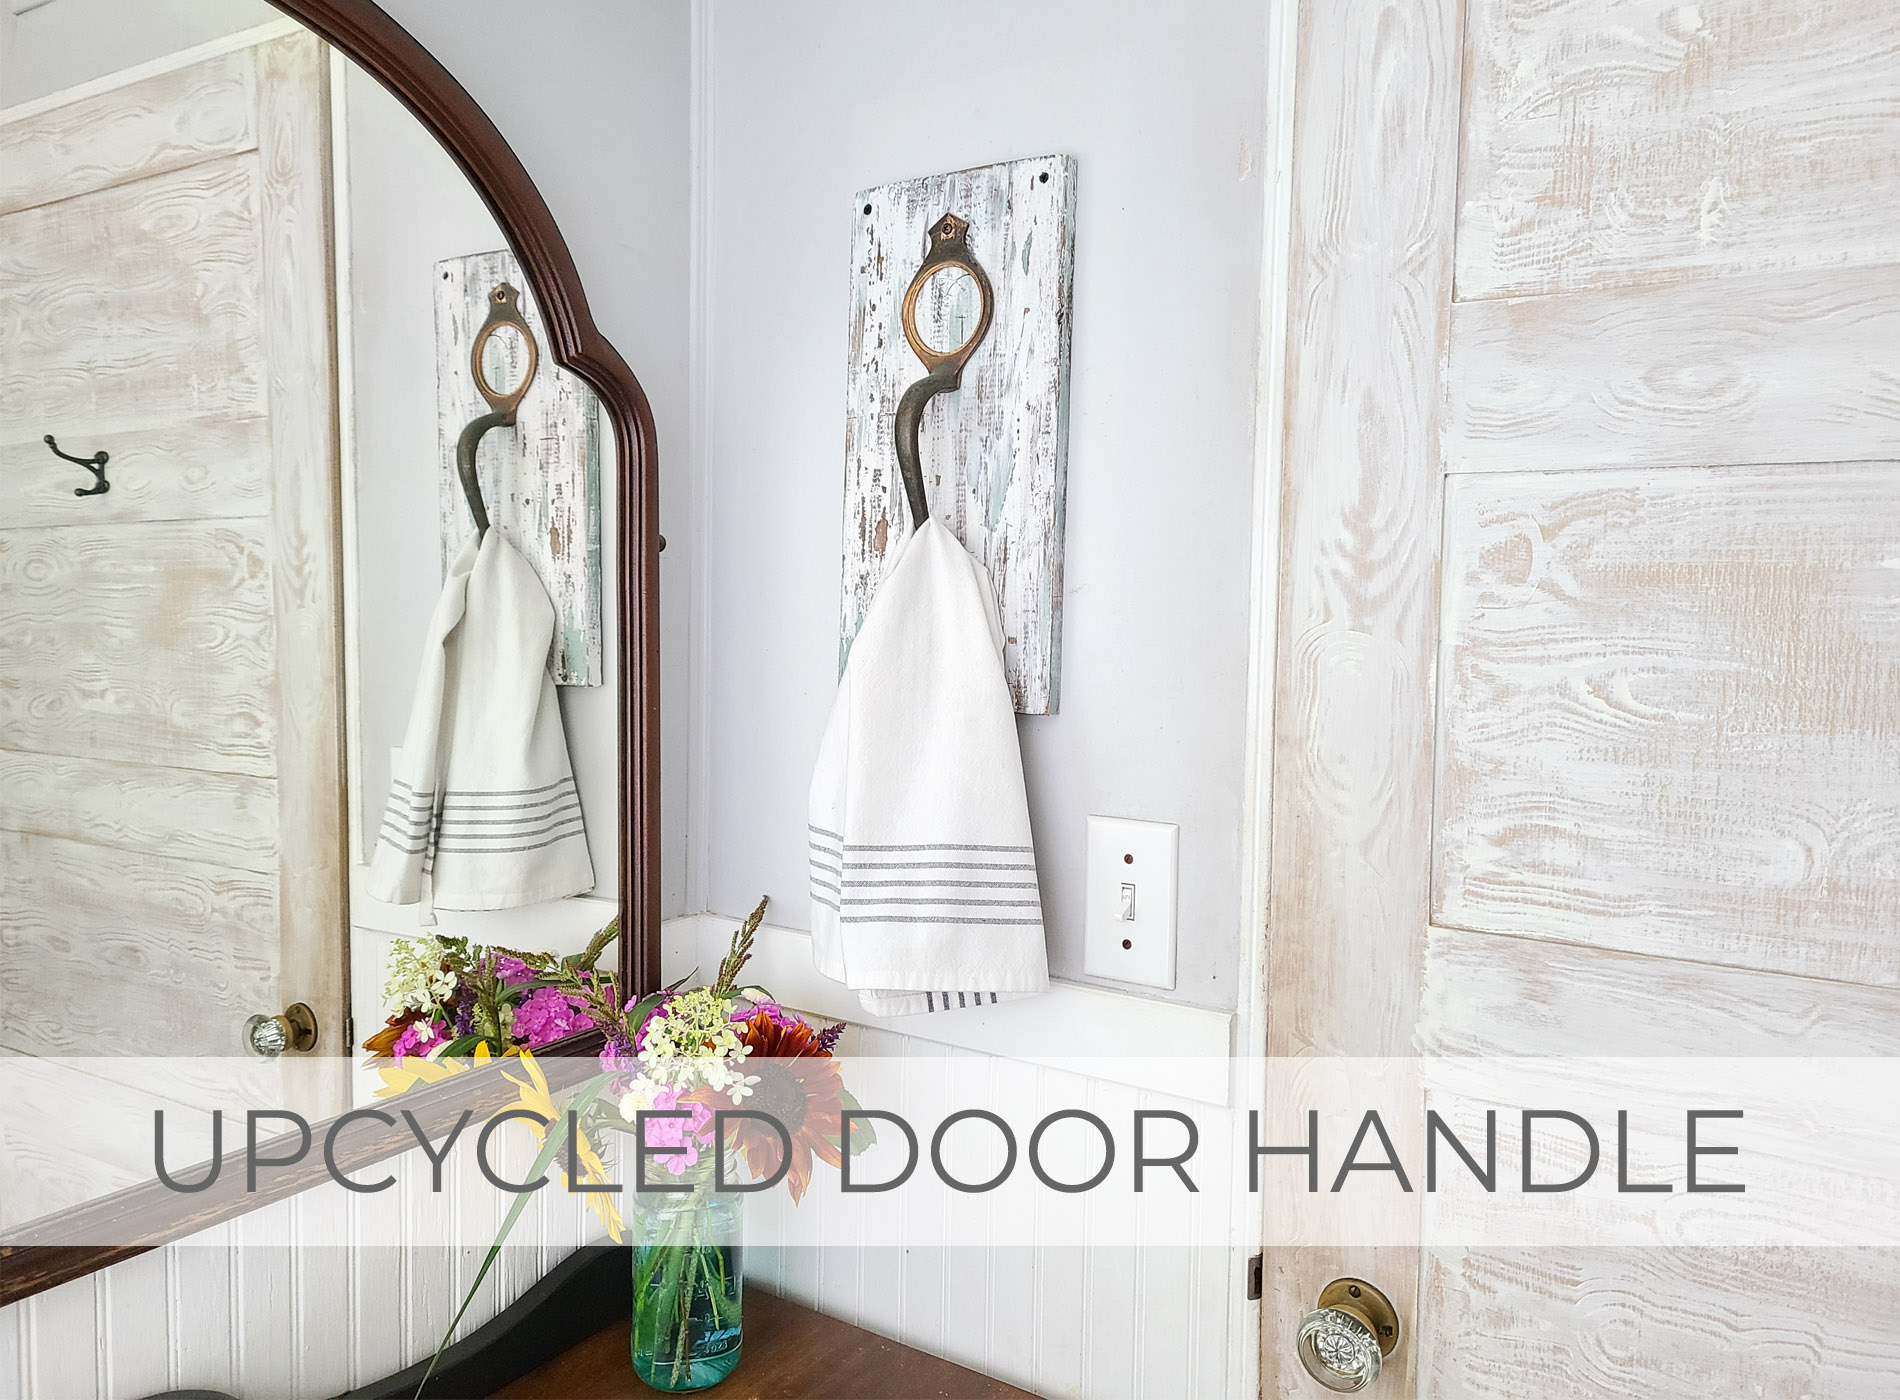 Showcase of Upcycled Door Handle by Larissa of Prodigal Pieces | prodigalpieces.com #prodigalpieces